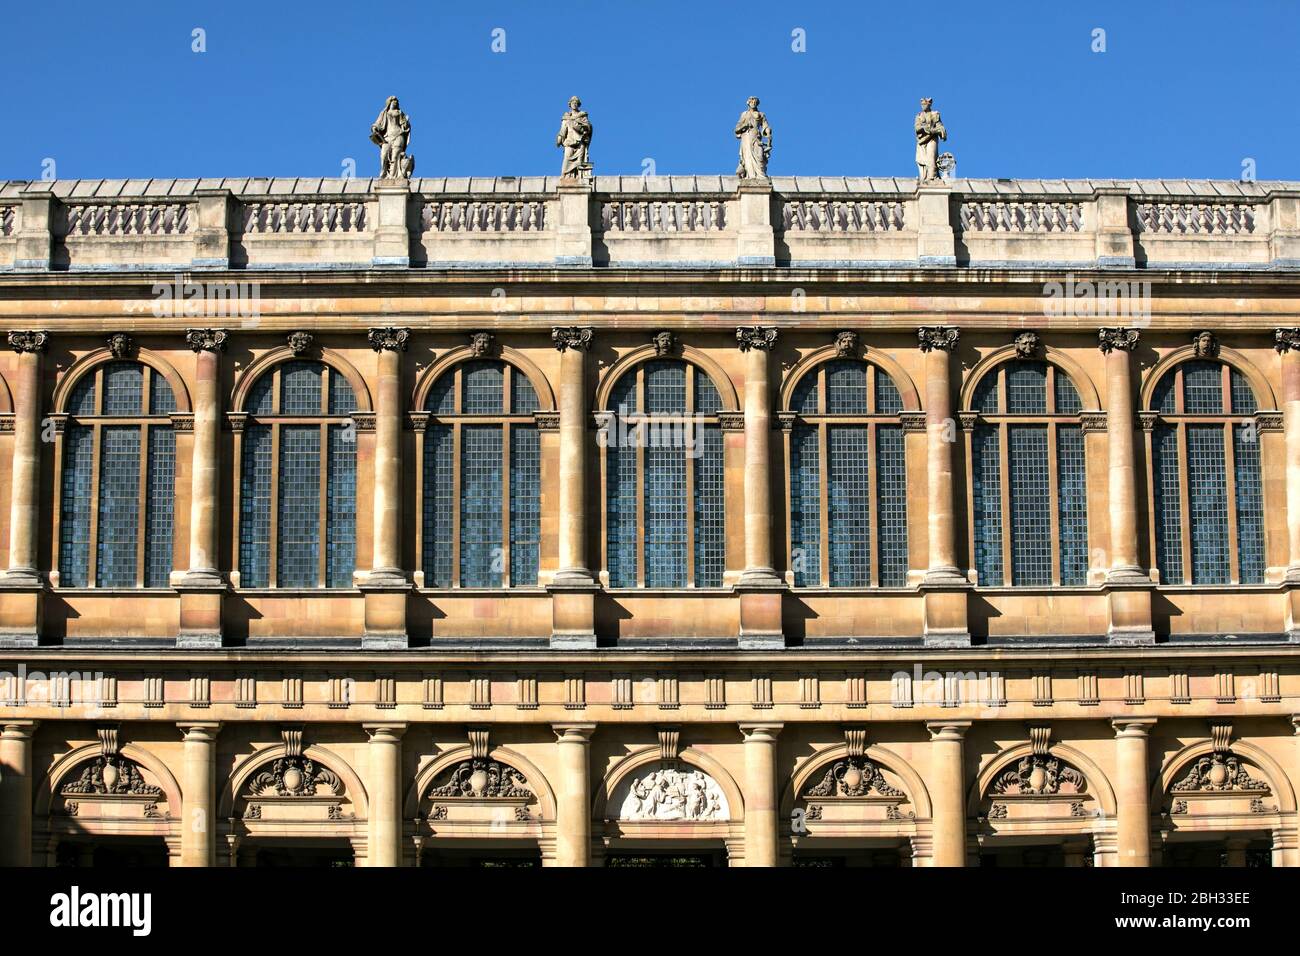 Statues Divinity, Law, Physic (medicine), and Mathematics, by Caius Gabriel Cibber, Wren Library, Nevile’s Court,Trinity College, Cambridge, England, Stock Photo